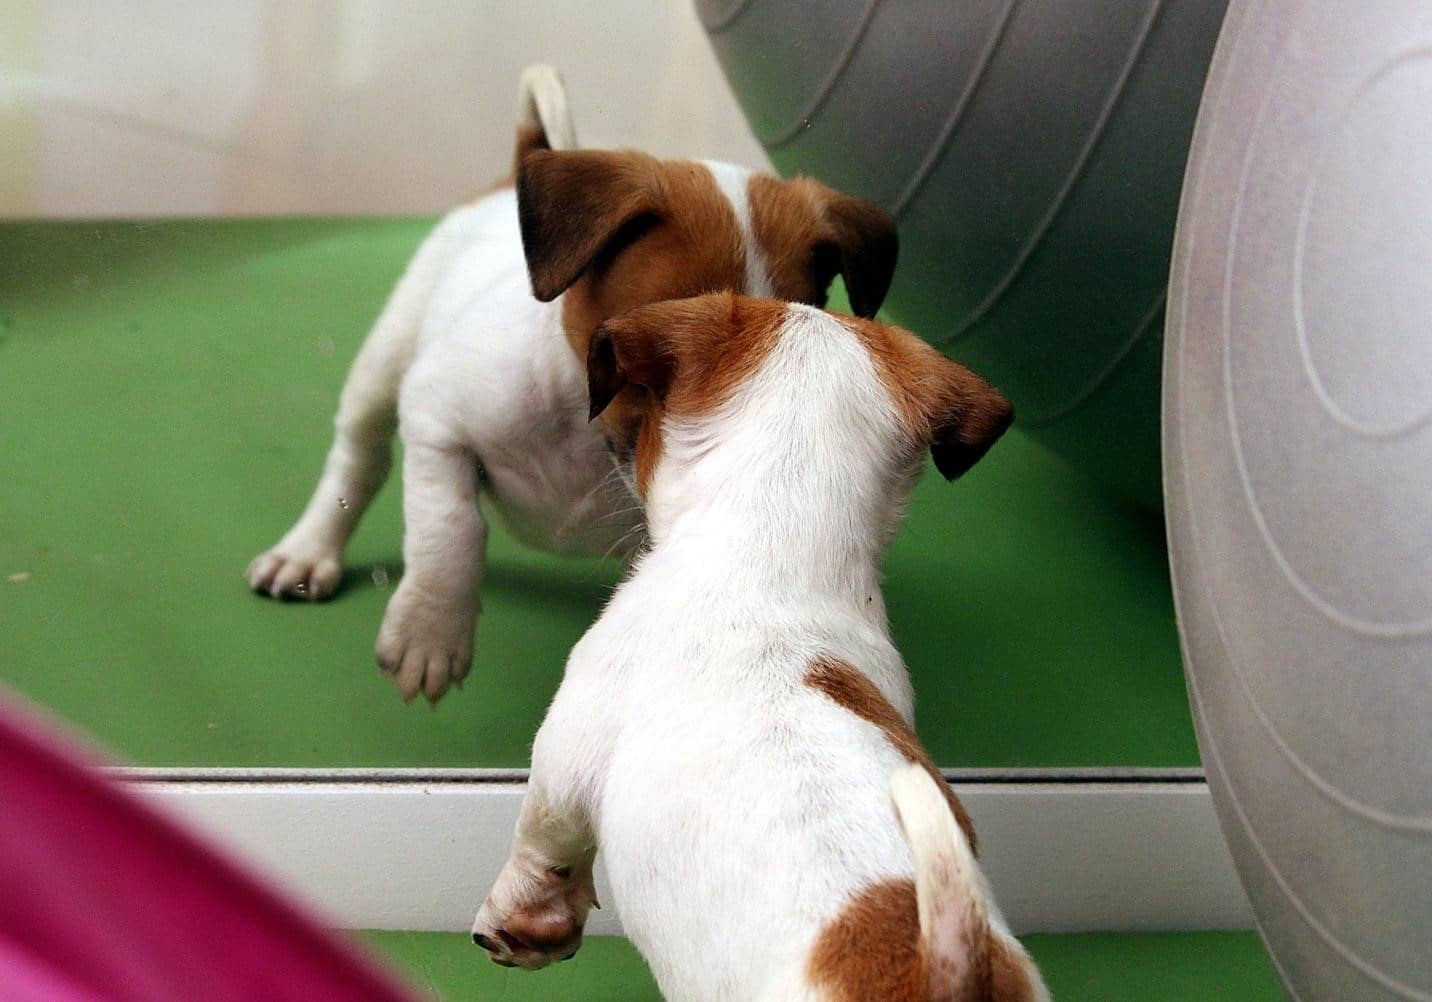 Can Dogs Recognize Themselves in a Mirror